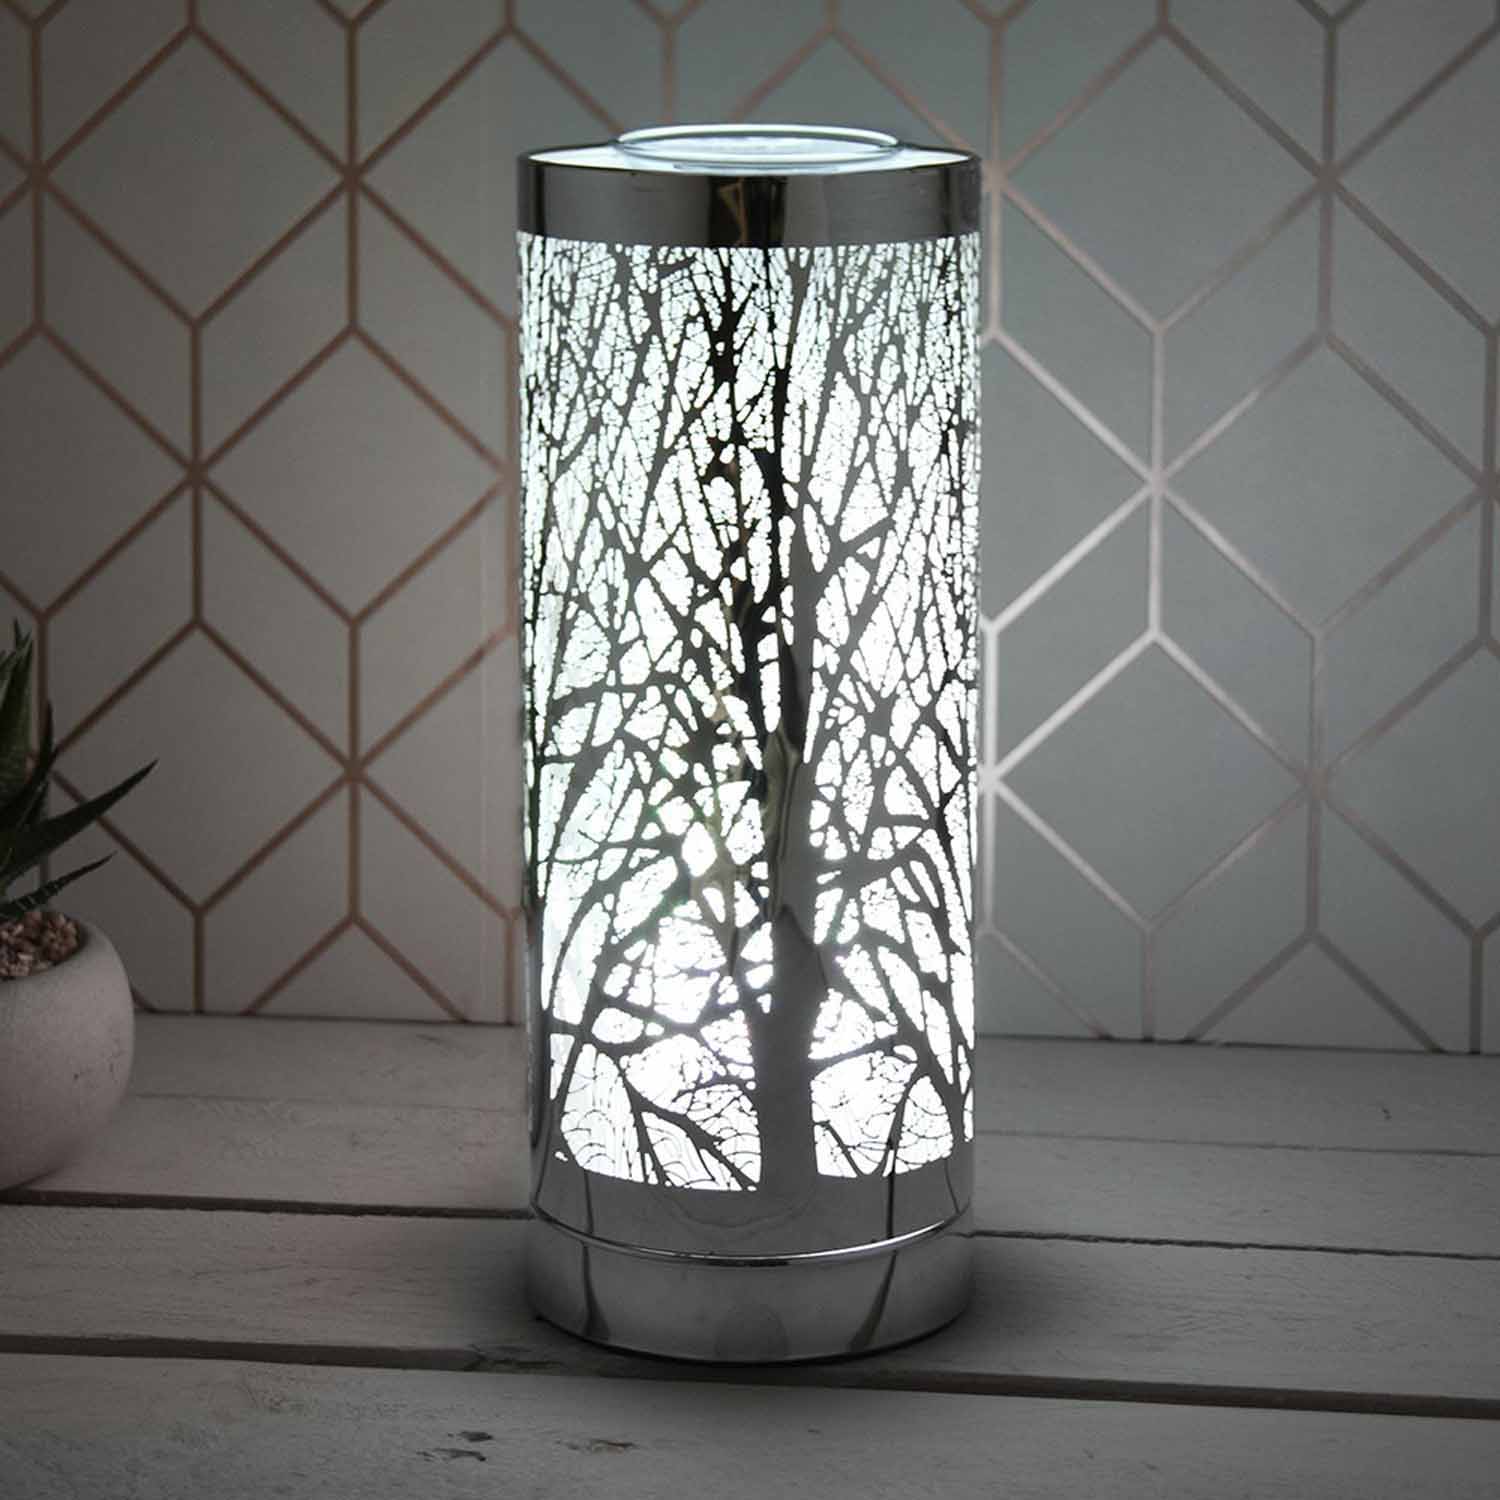 The Home LED Colour Changing Aroma Lamp - Silver 1 Shaws Department Stores